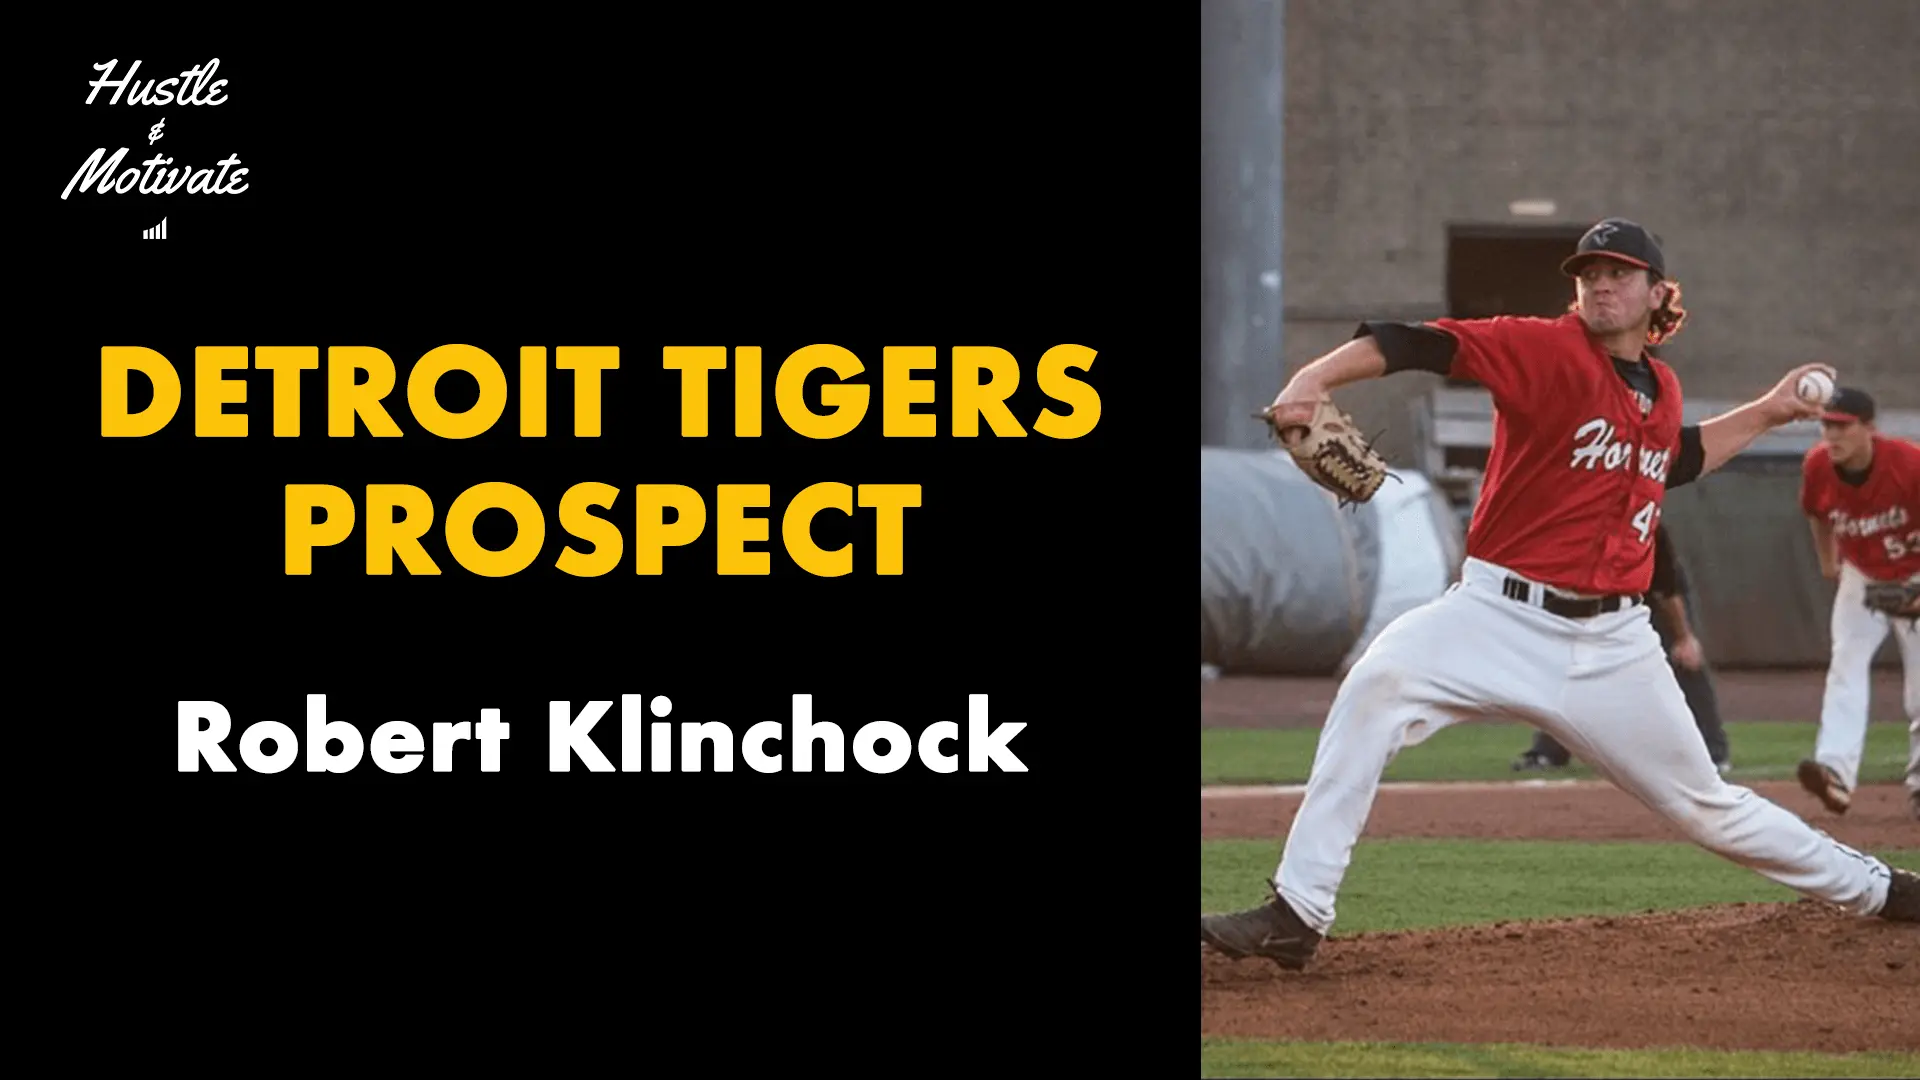 Detroit Tigers prospect Robert Klinchock joins the Hustle & Motivate podcast for an interview about his journey from D3 to the MLB Draft